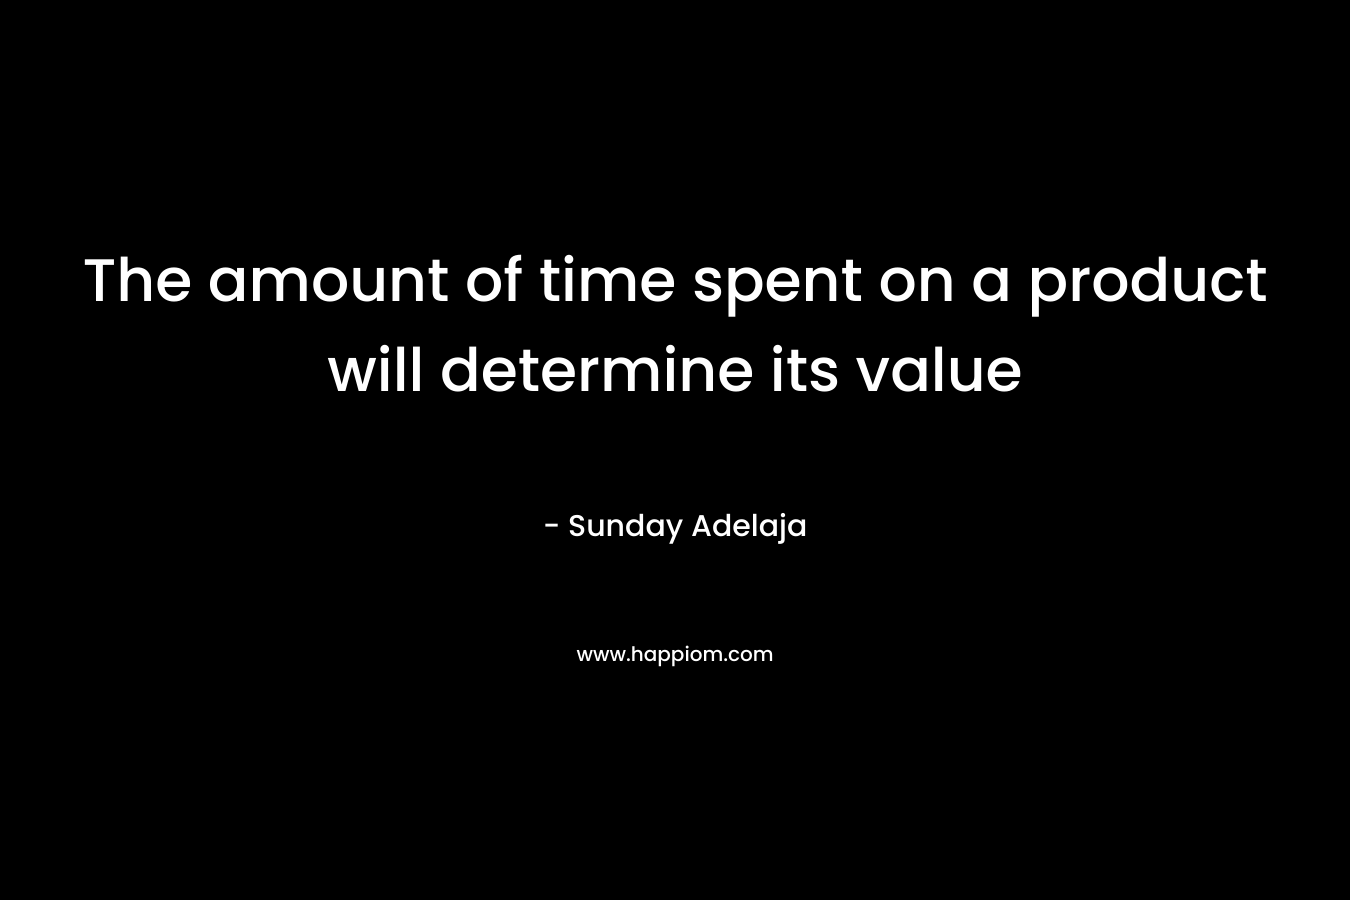 The amount of time spent on a product will determine its value